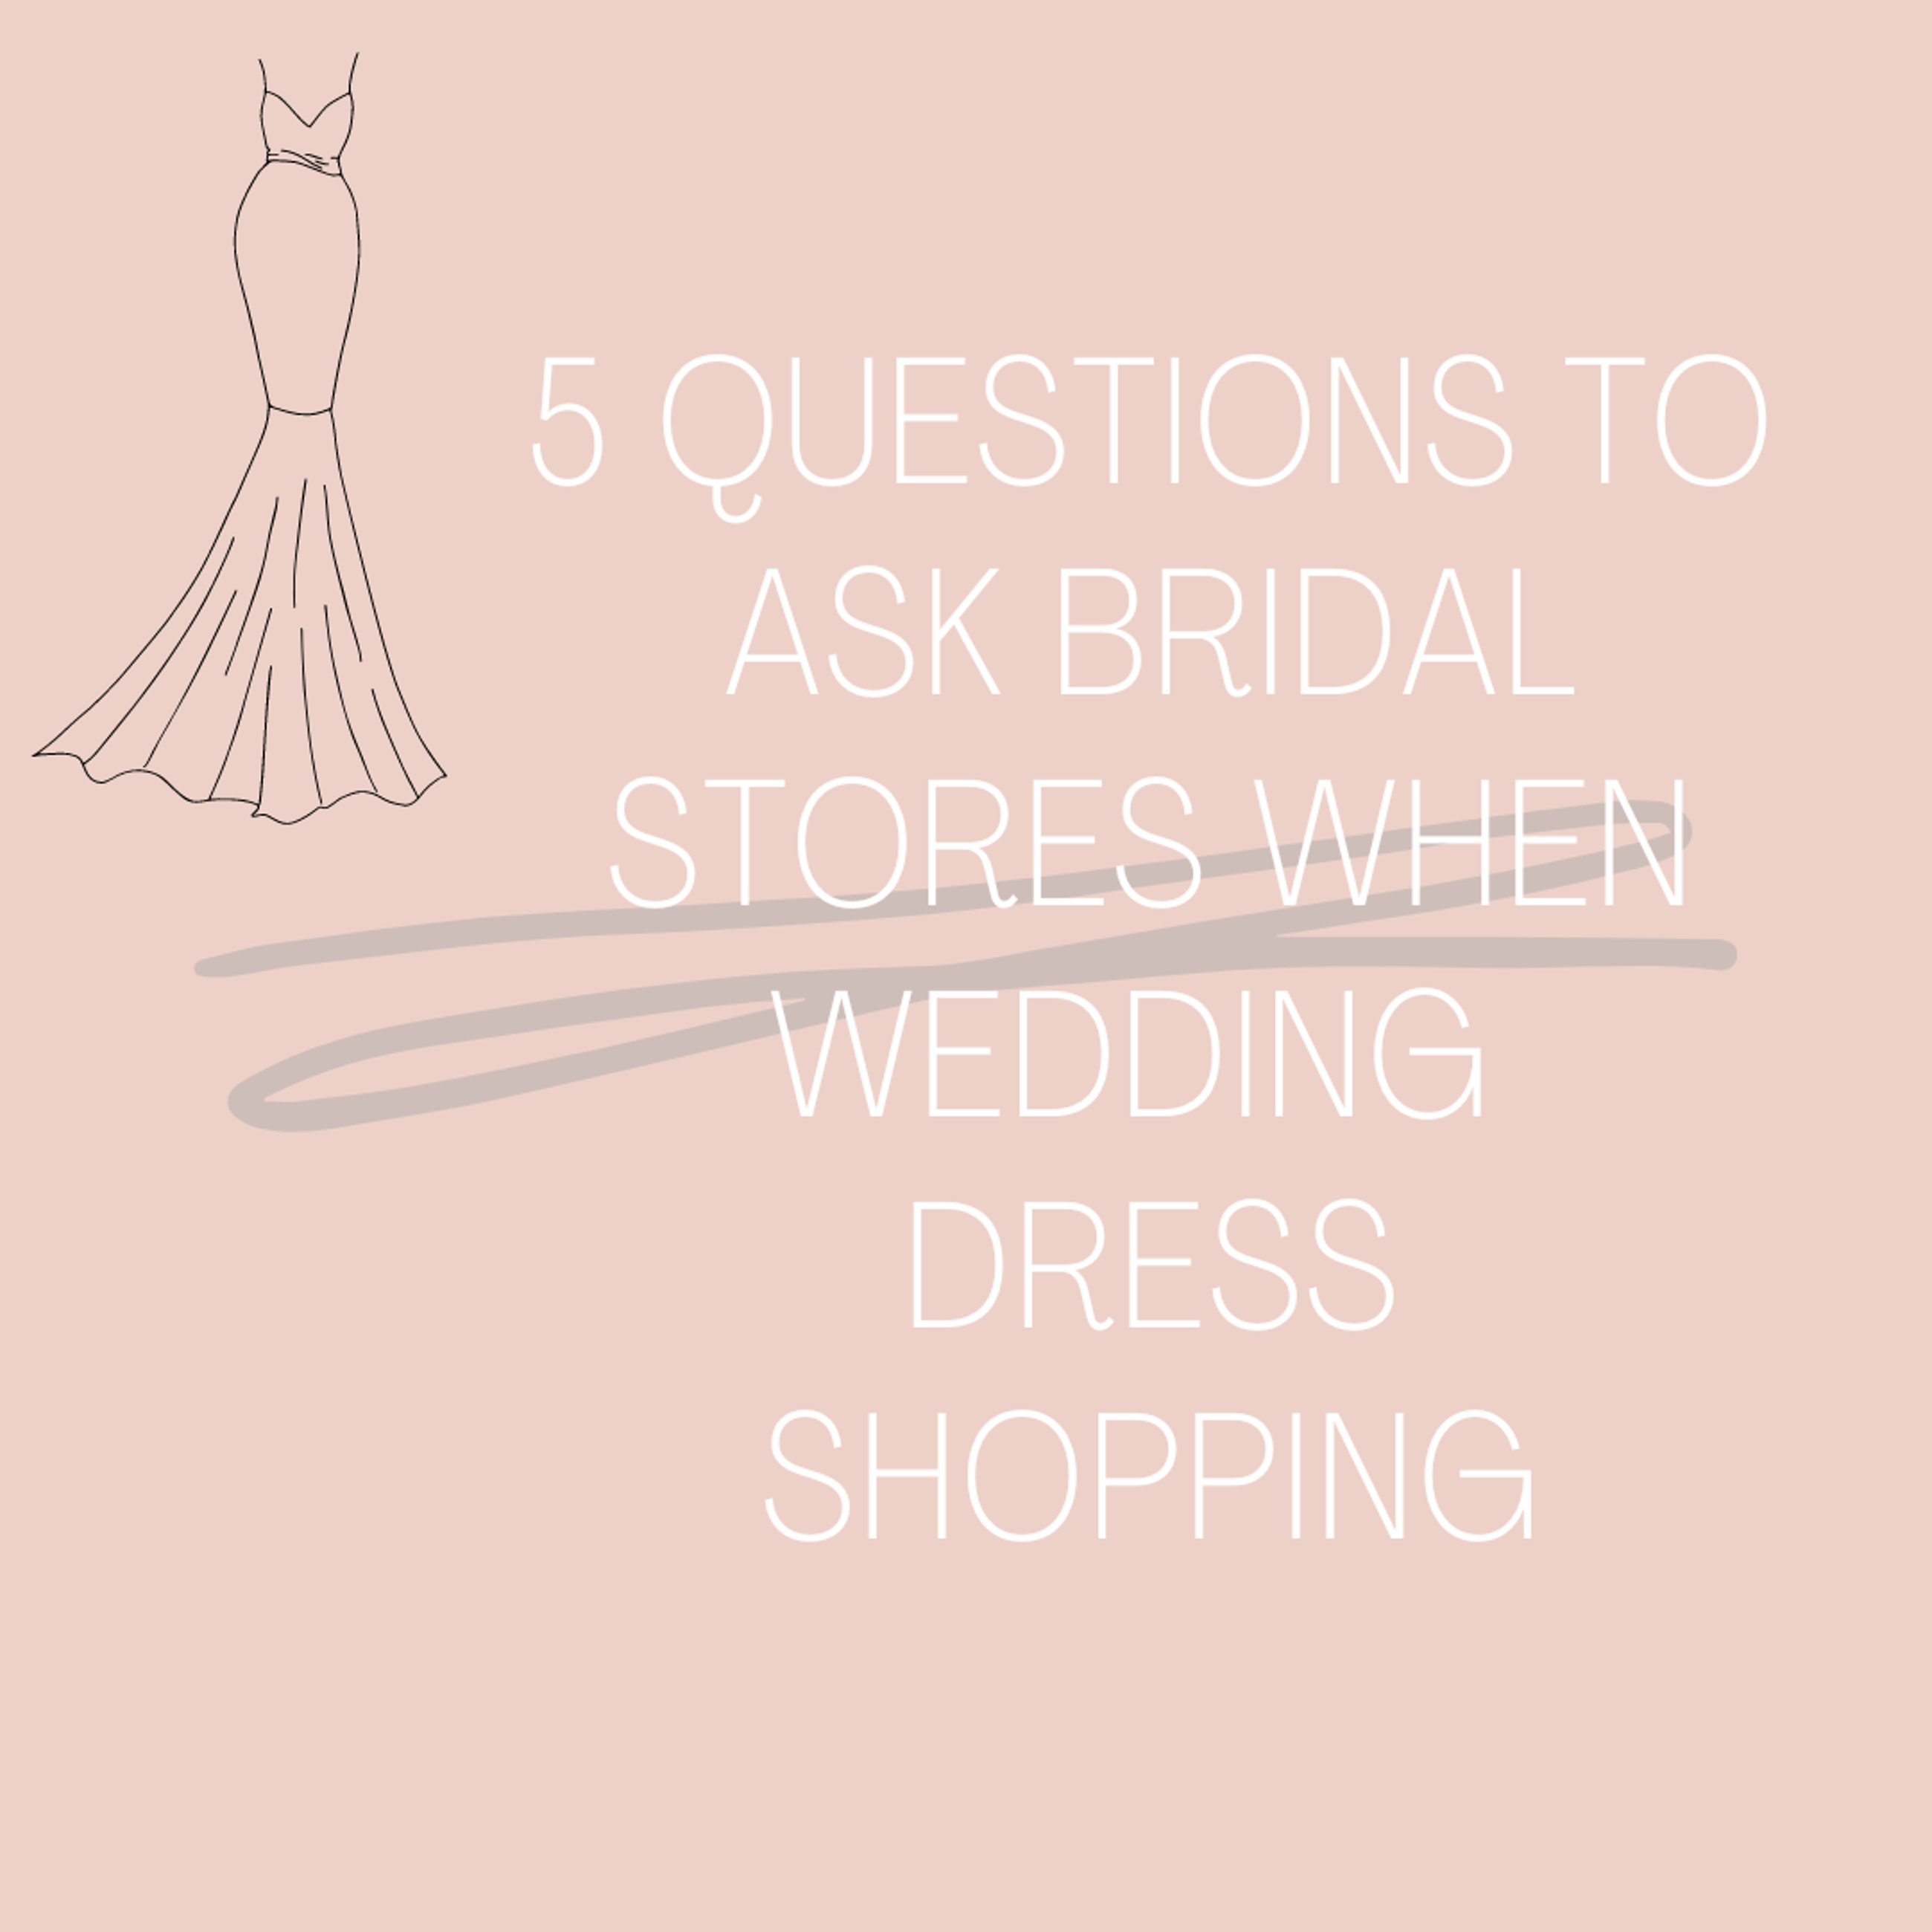 Five Questions To Ask Bridal Stores When Wedding Dress Shopping. Desktop Image